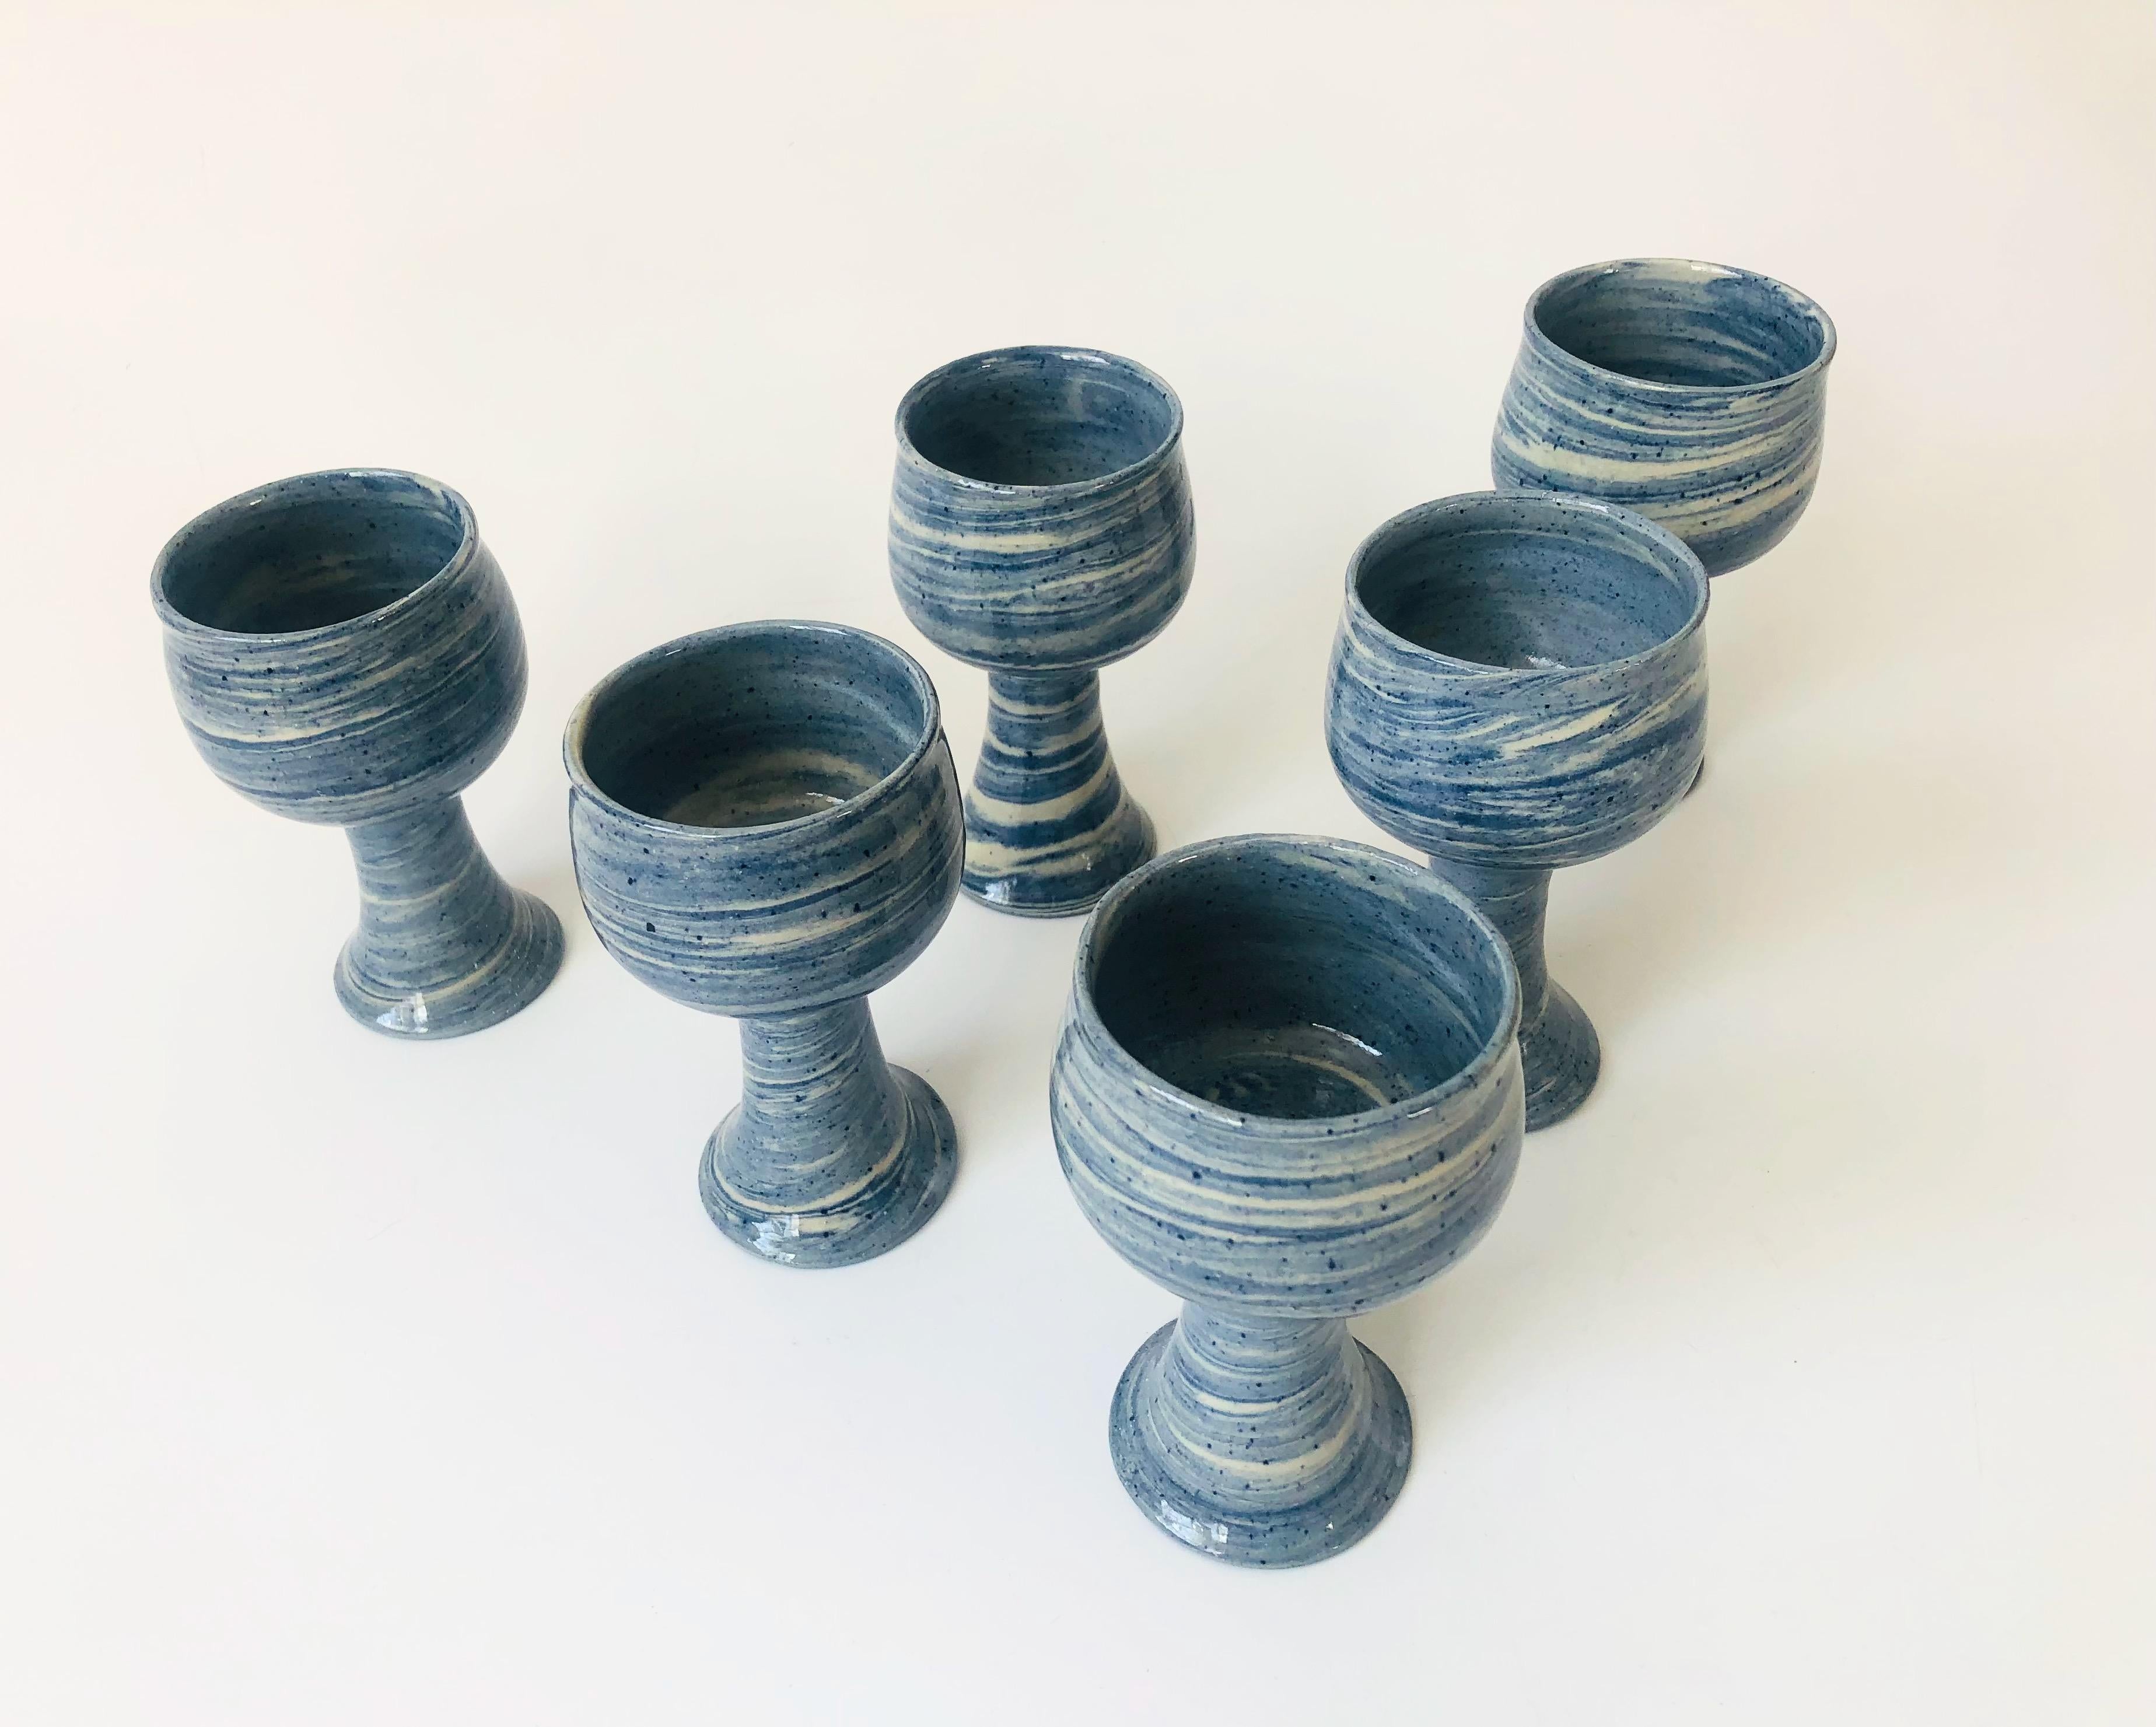 A set of 6 vintage studio pottery goblets. Lovely blue swirl glazes. Signed by the maker on the bases and dated 1977.
 